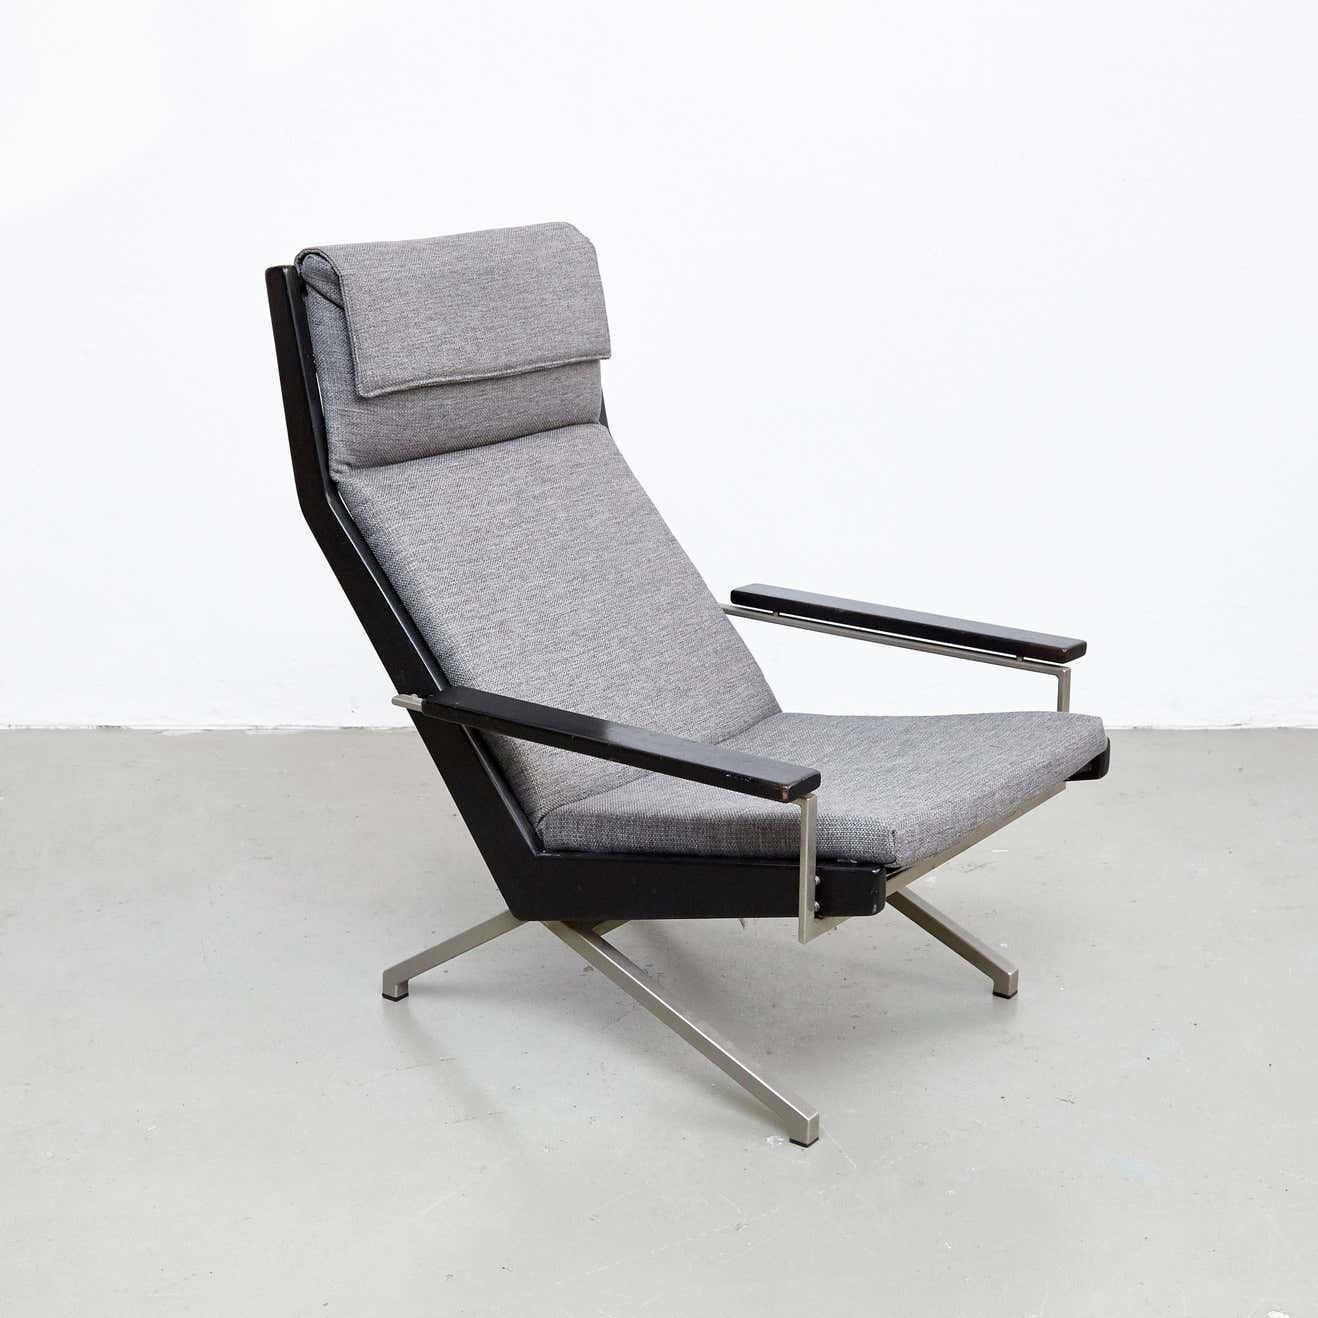 Mid-Century Modern Rare Hand Signed Rob Parry Easy Chair for Gelderland Netherlands, circa 1960